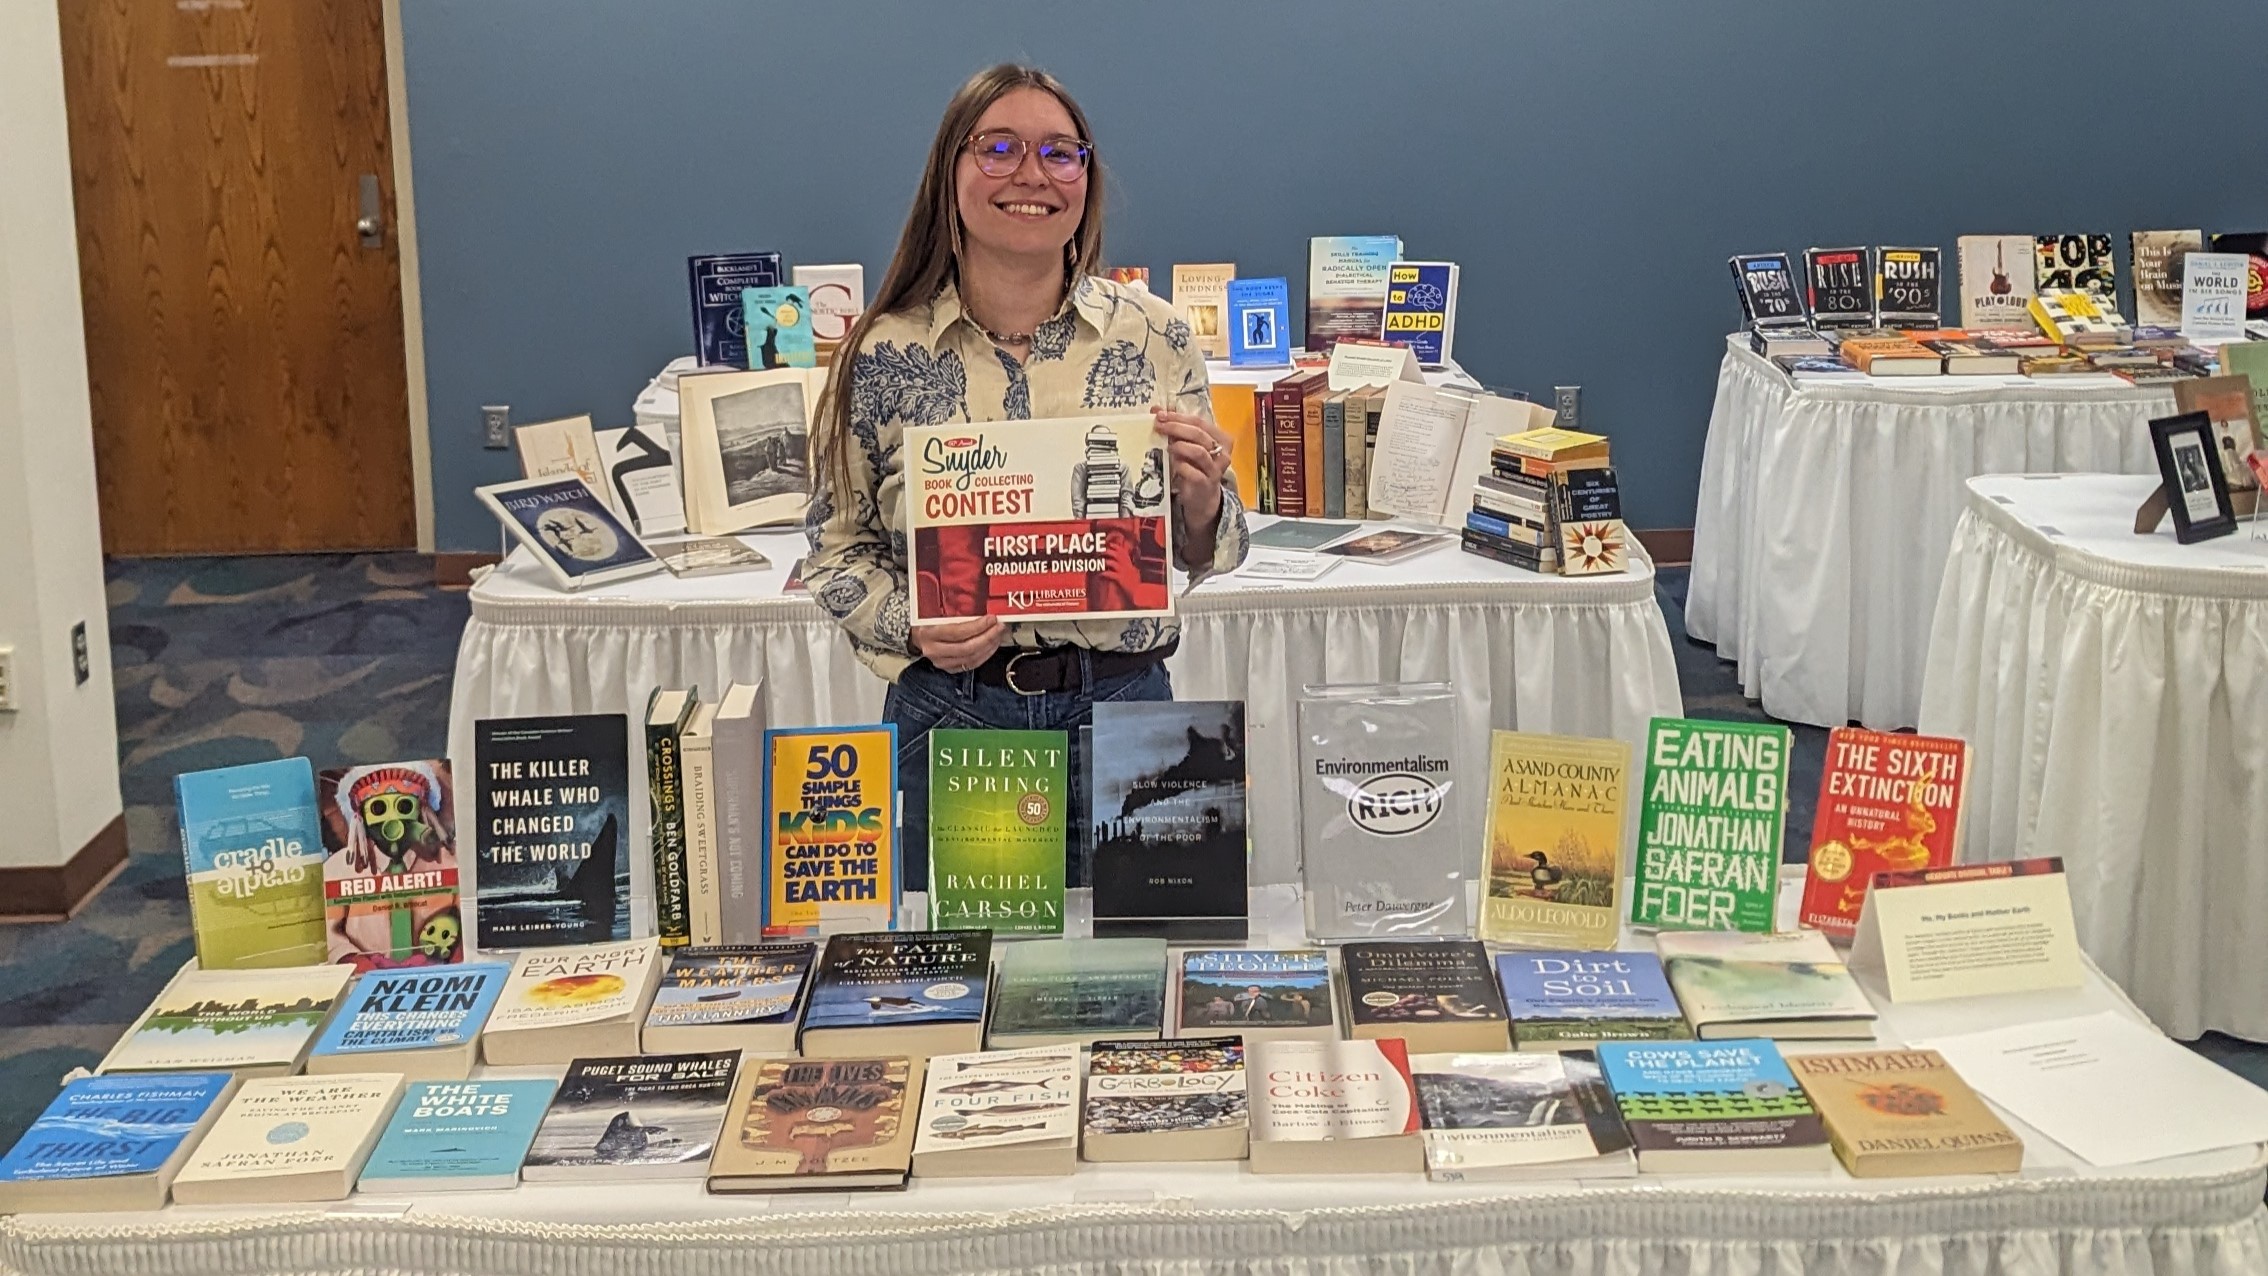 Emma next to table showing her book collection